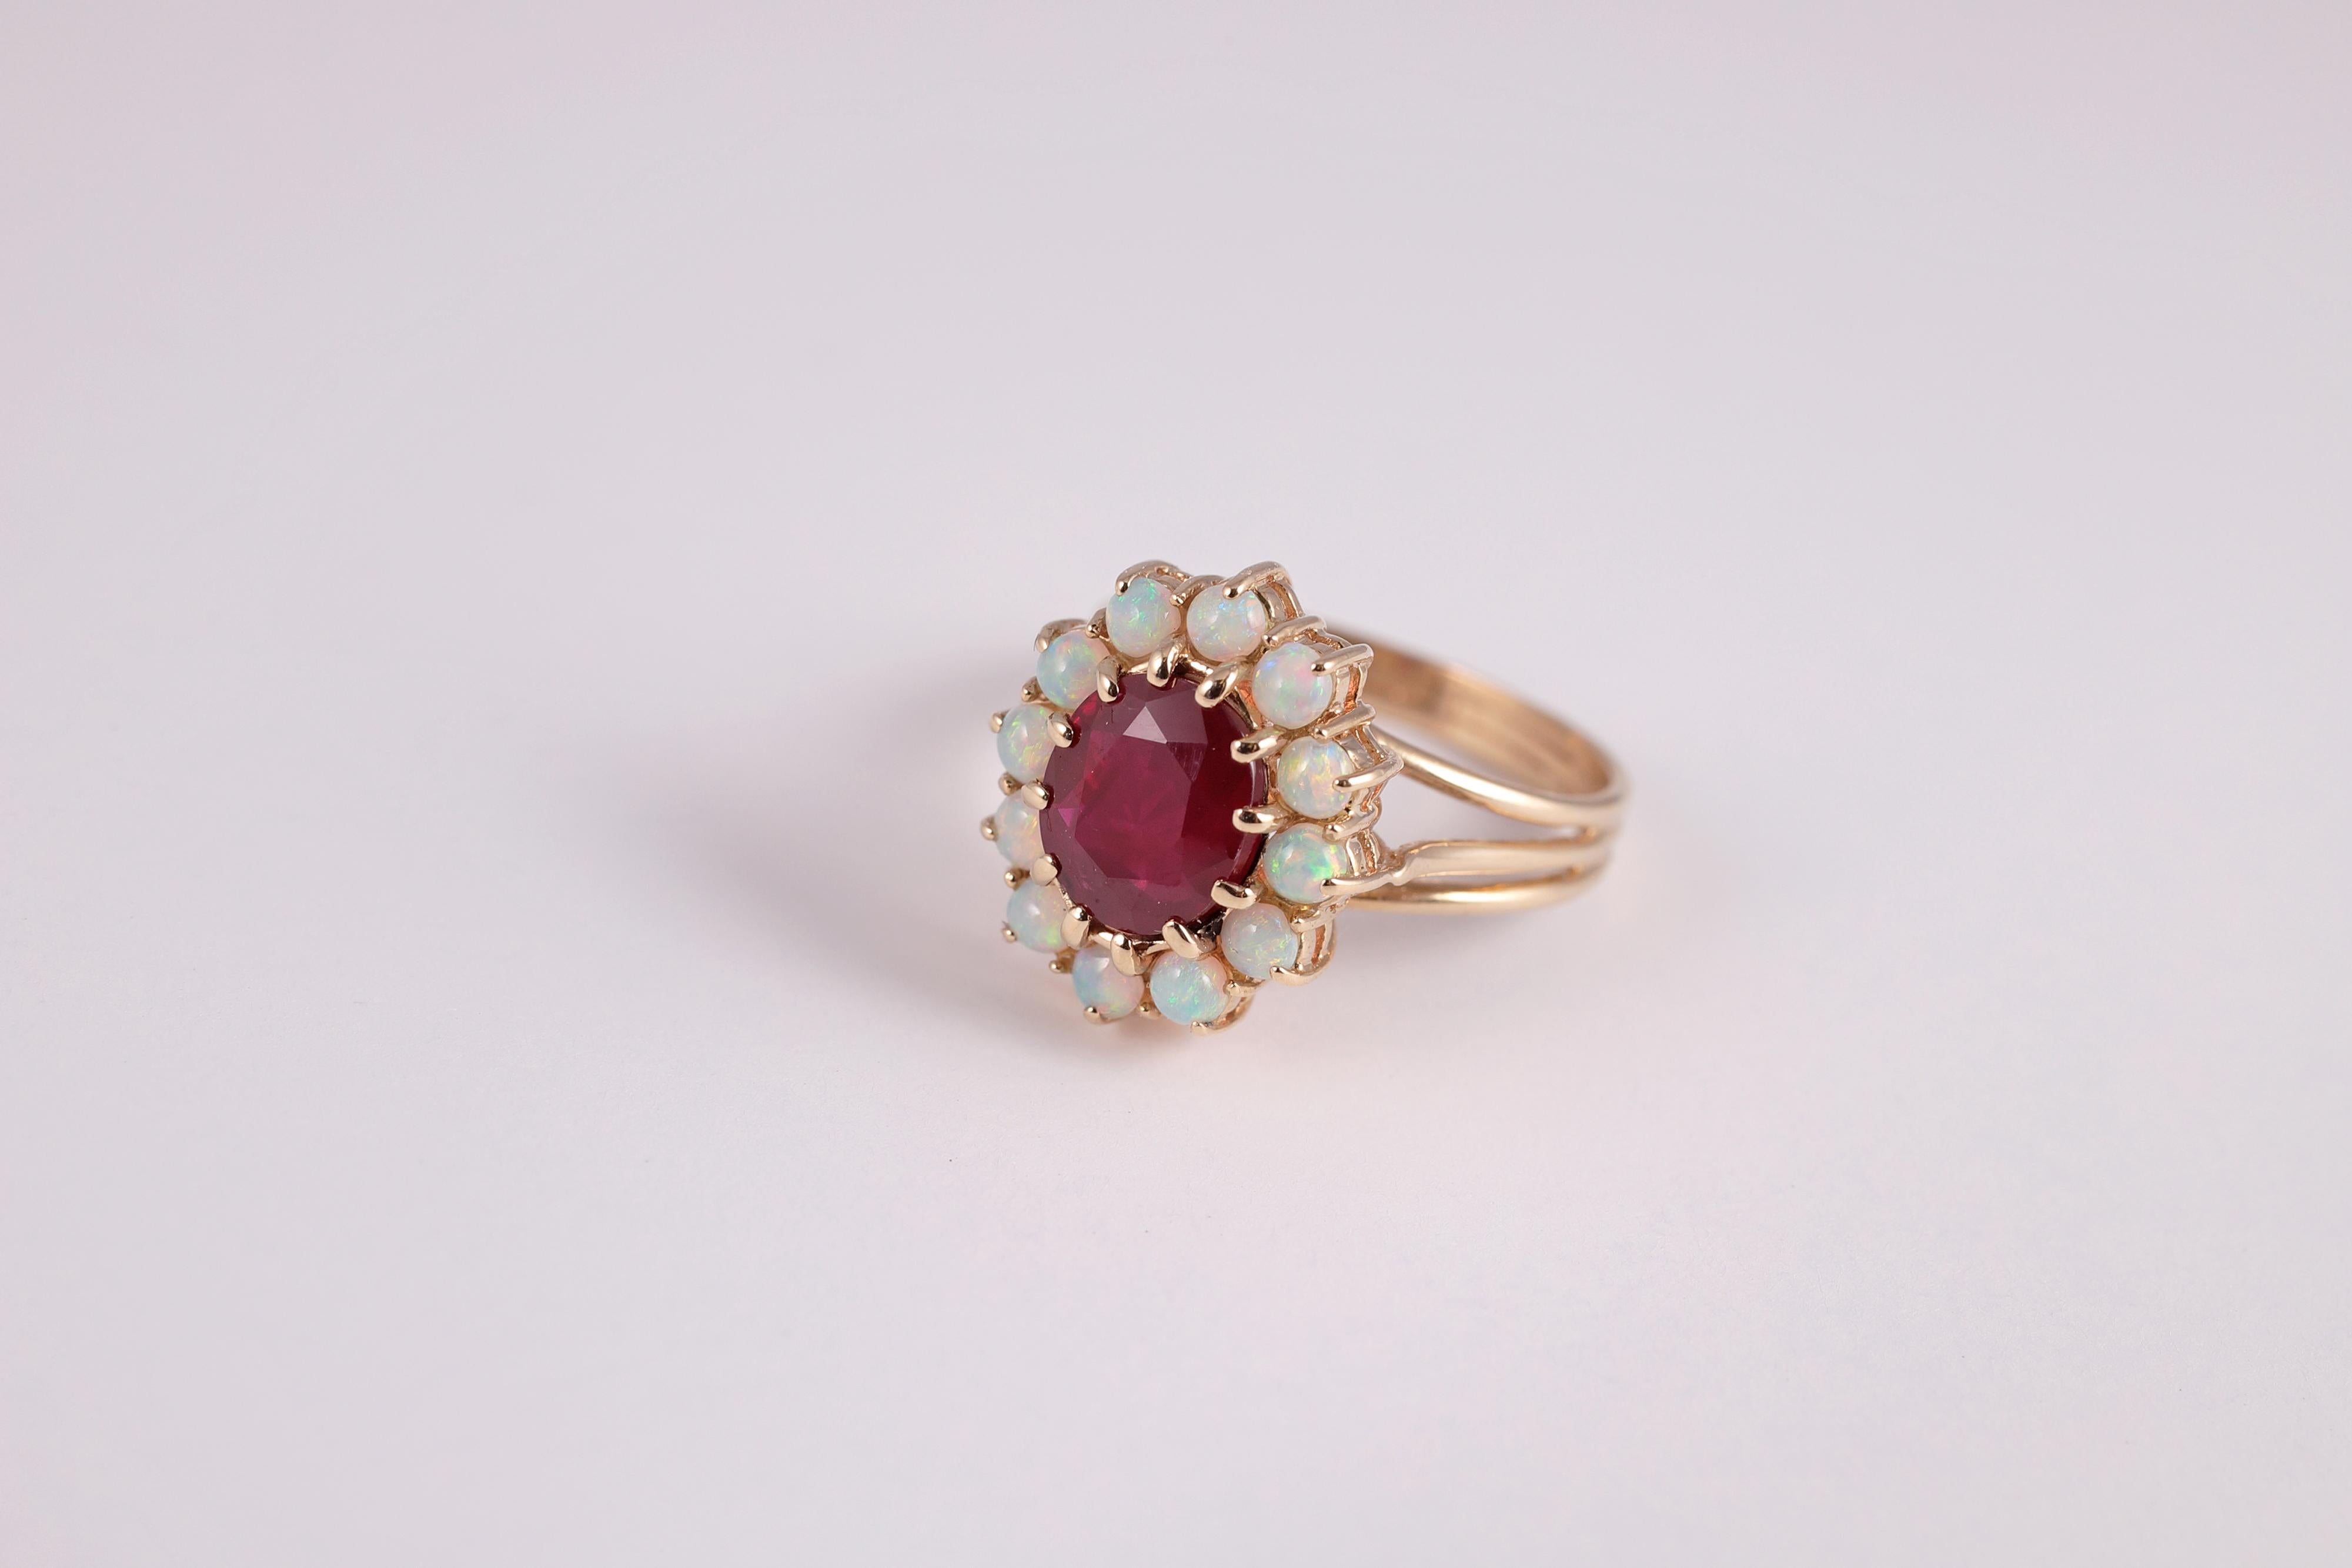 Sure to impress!  This 2.23 carat untreated Burma ruby and opal halo ring is in 14 karat yellow gold. 
Size 6 3/4.
Accompanied by Stone Group Lab Identification Report stating the following:
Species:  Corundum
Variety:  Ruby
Cut:  Oval
Size:  8.09